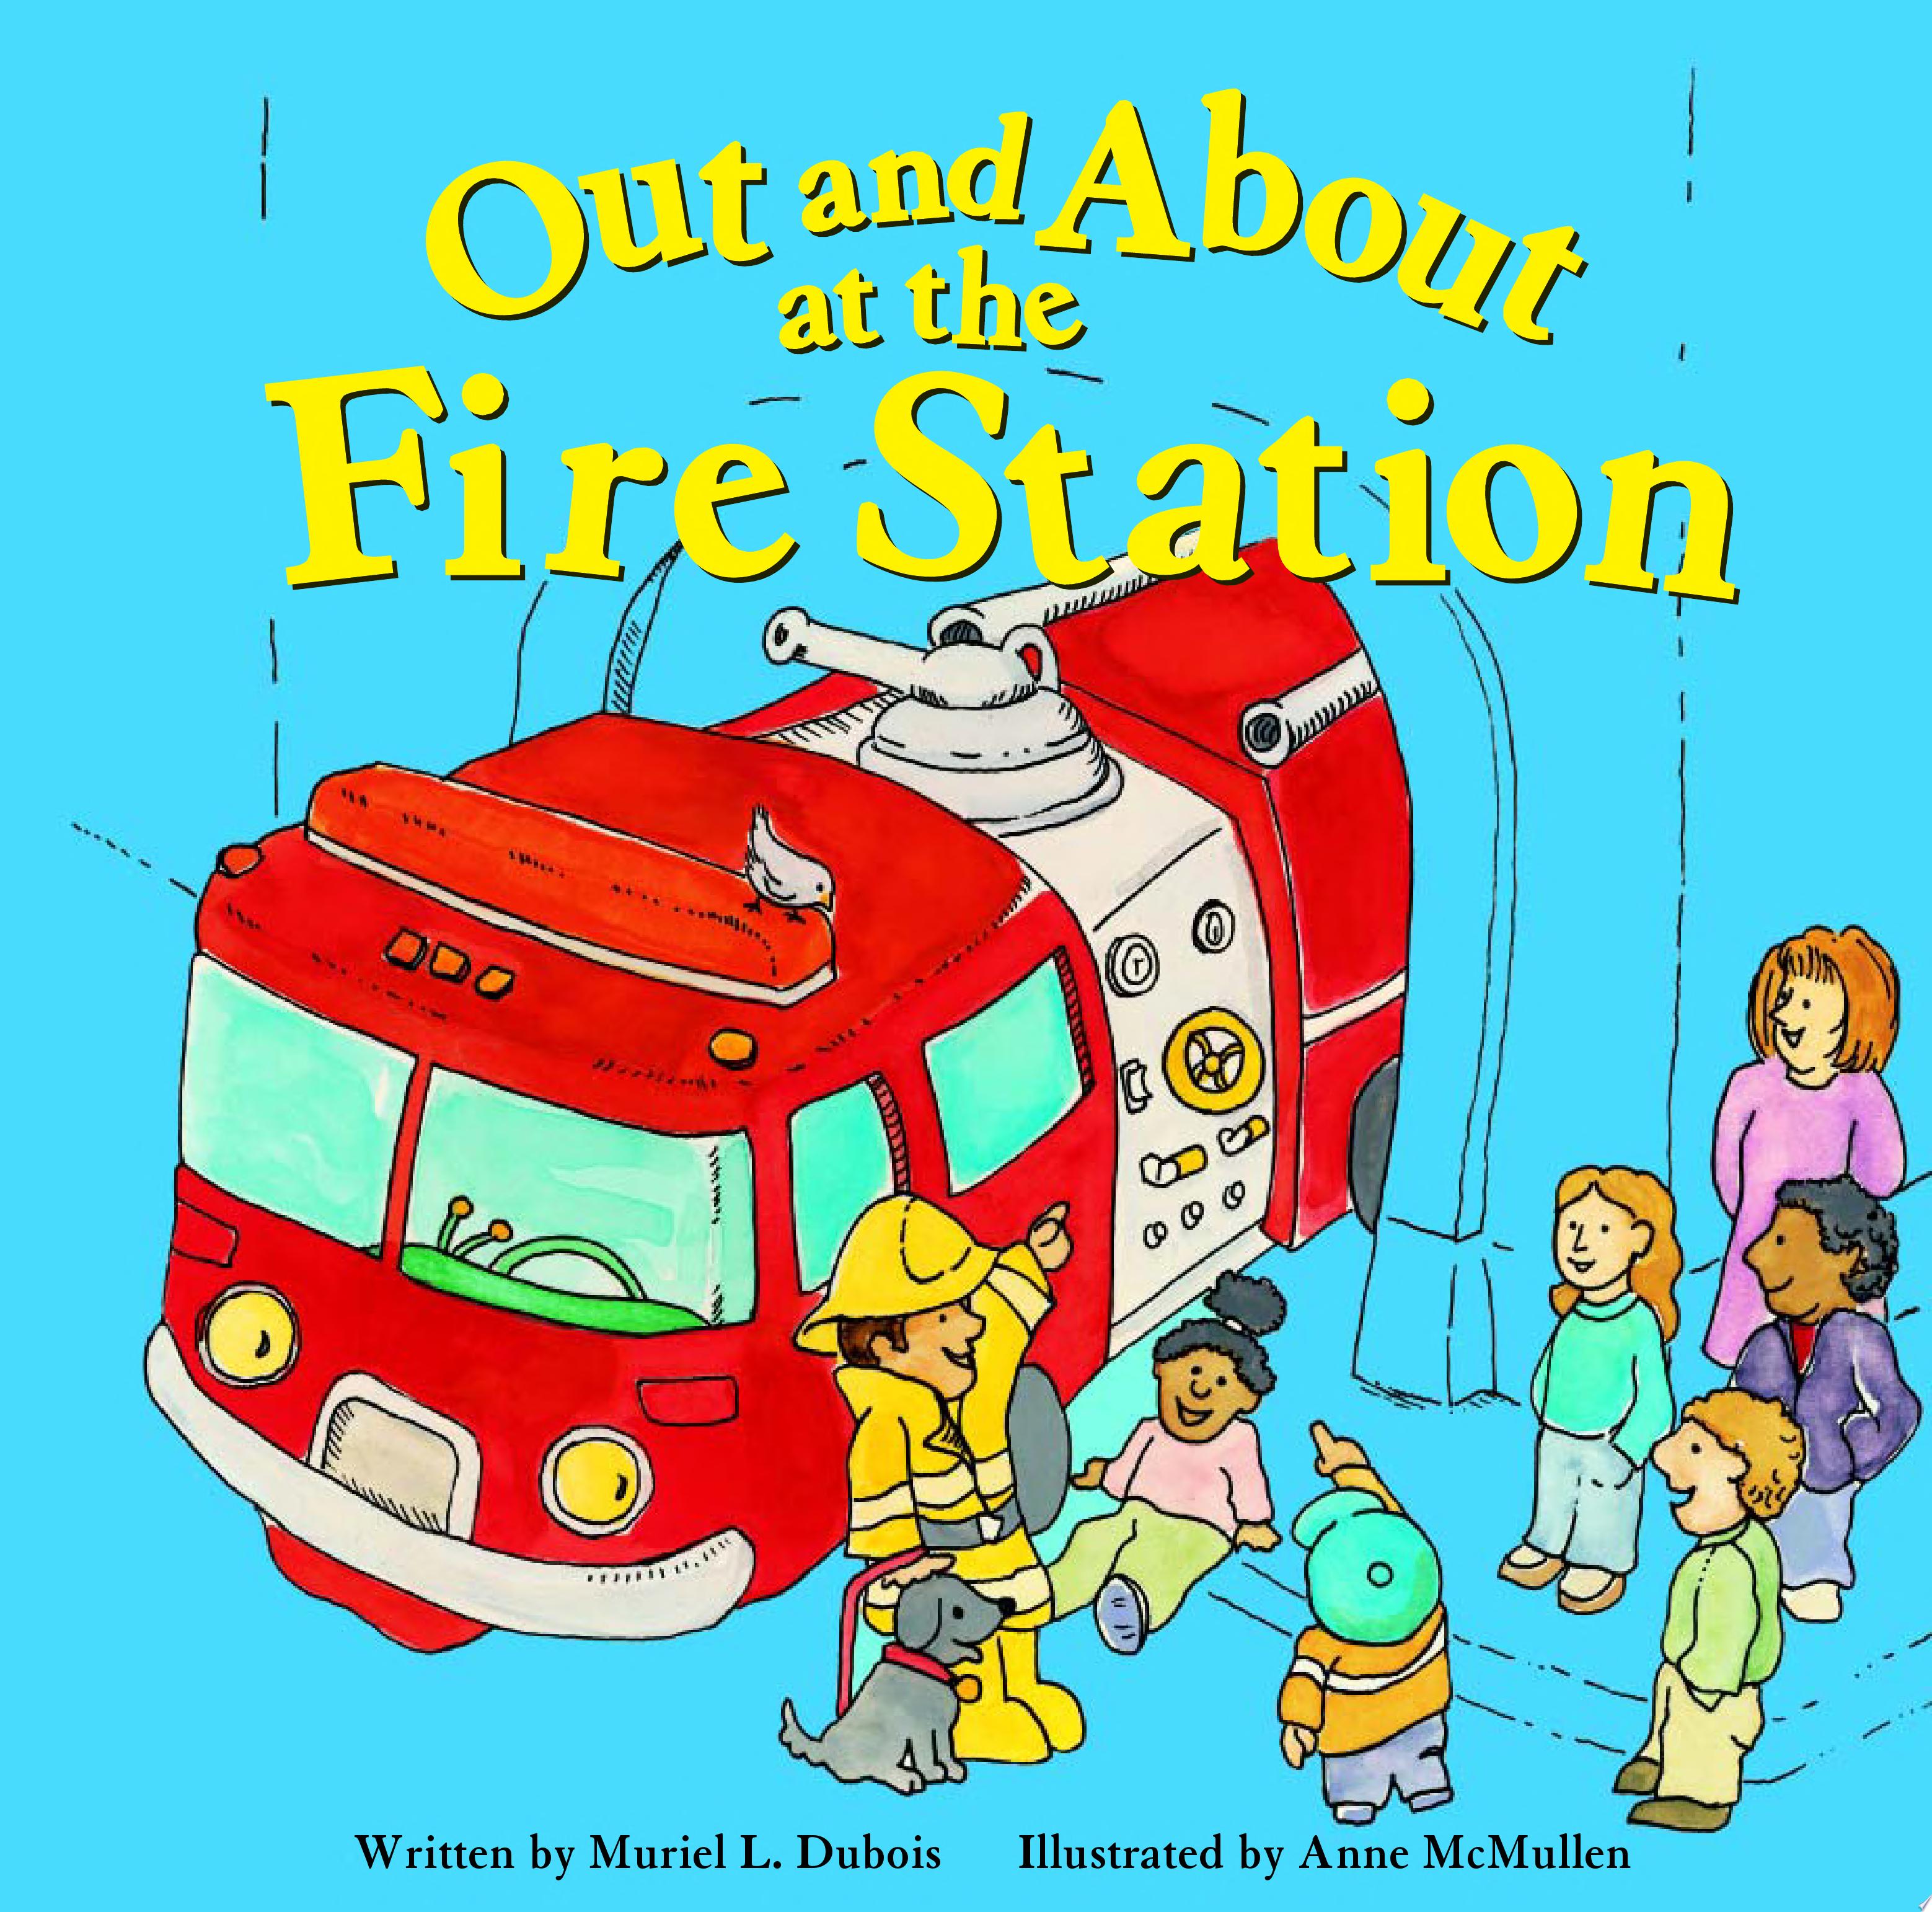 Image for "Out and about at the Fire Station"